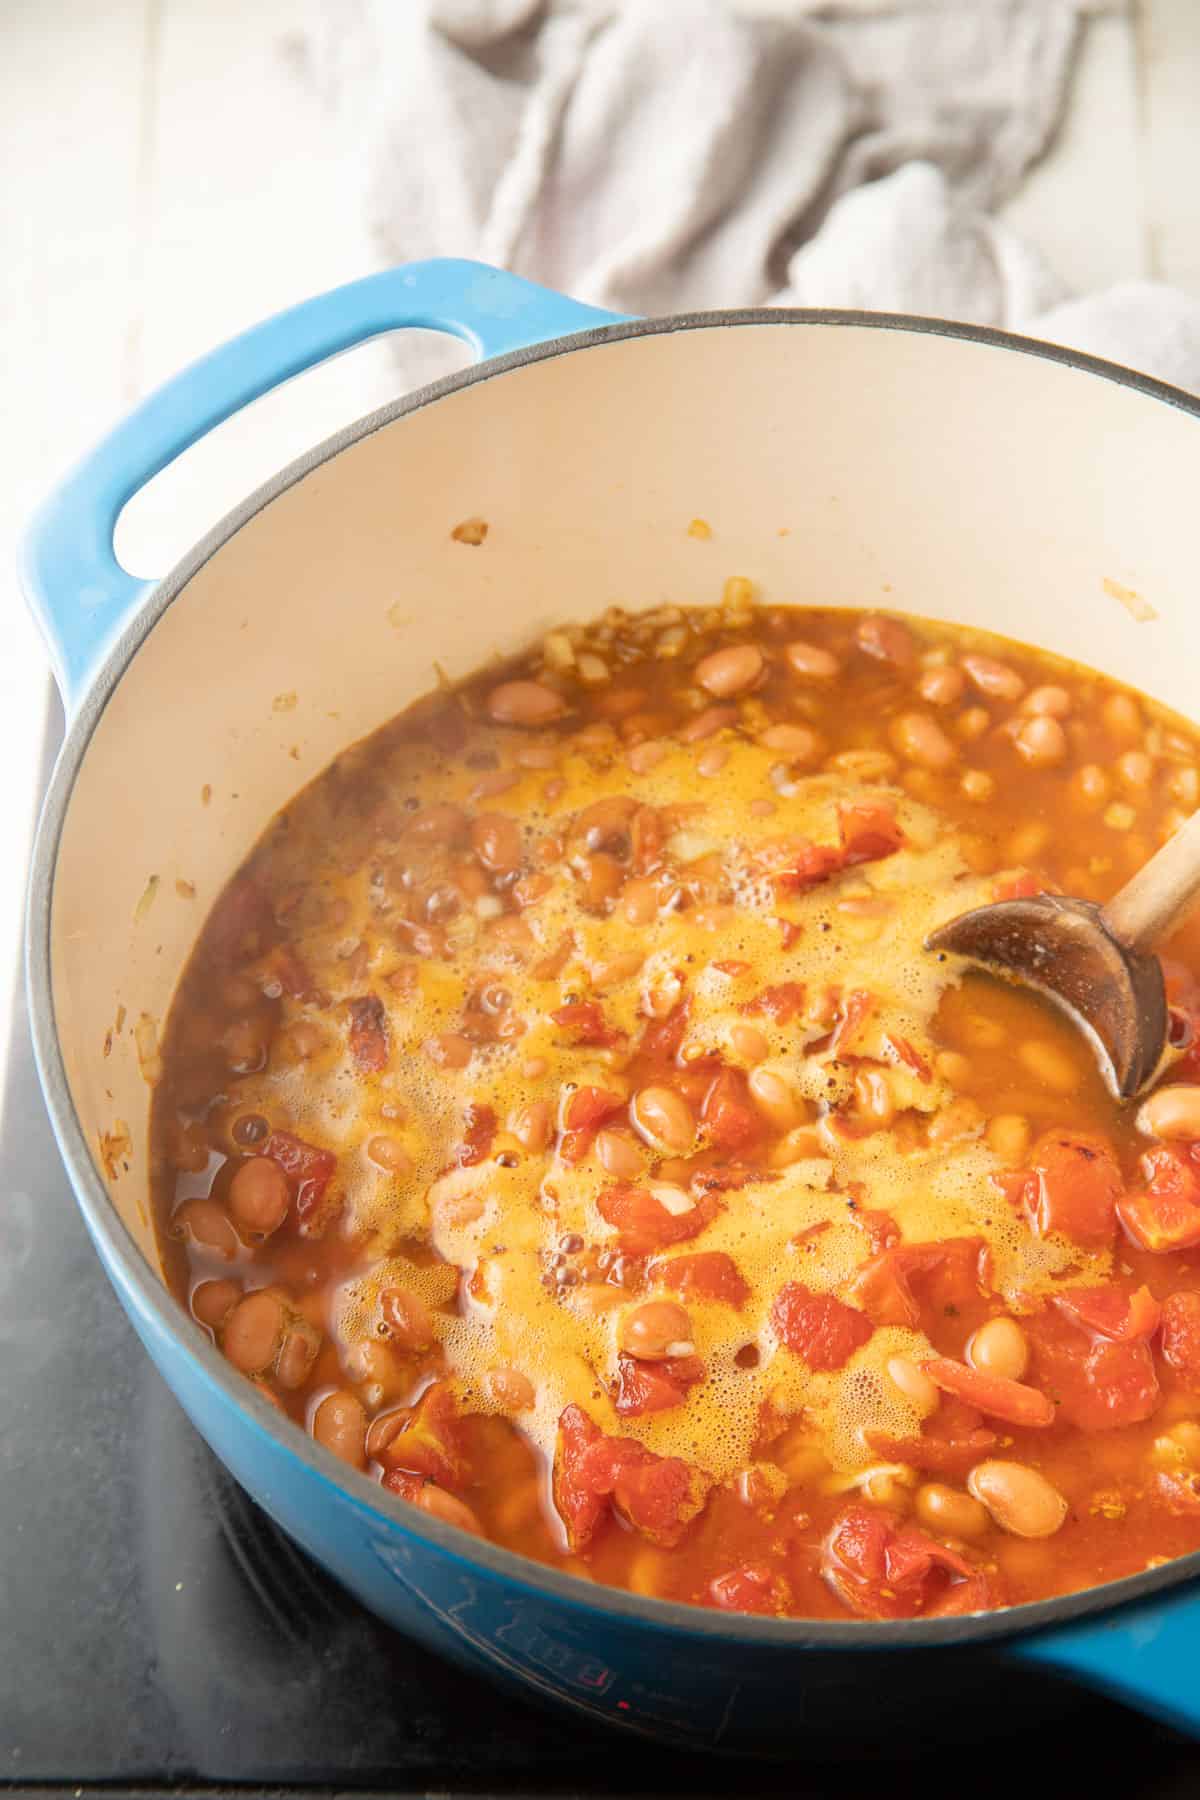 Pinto beans and tomatoes simmering in seasoned broth in a pot.